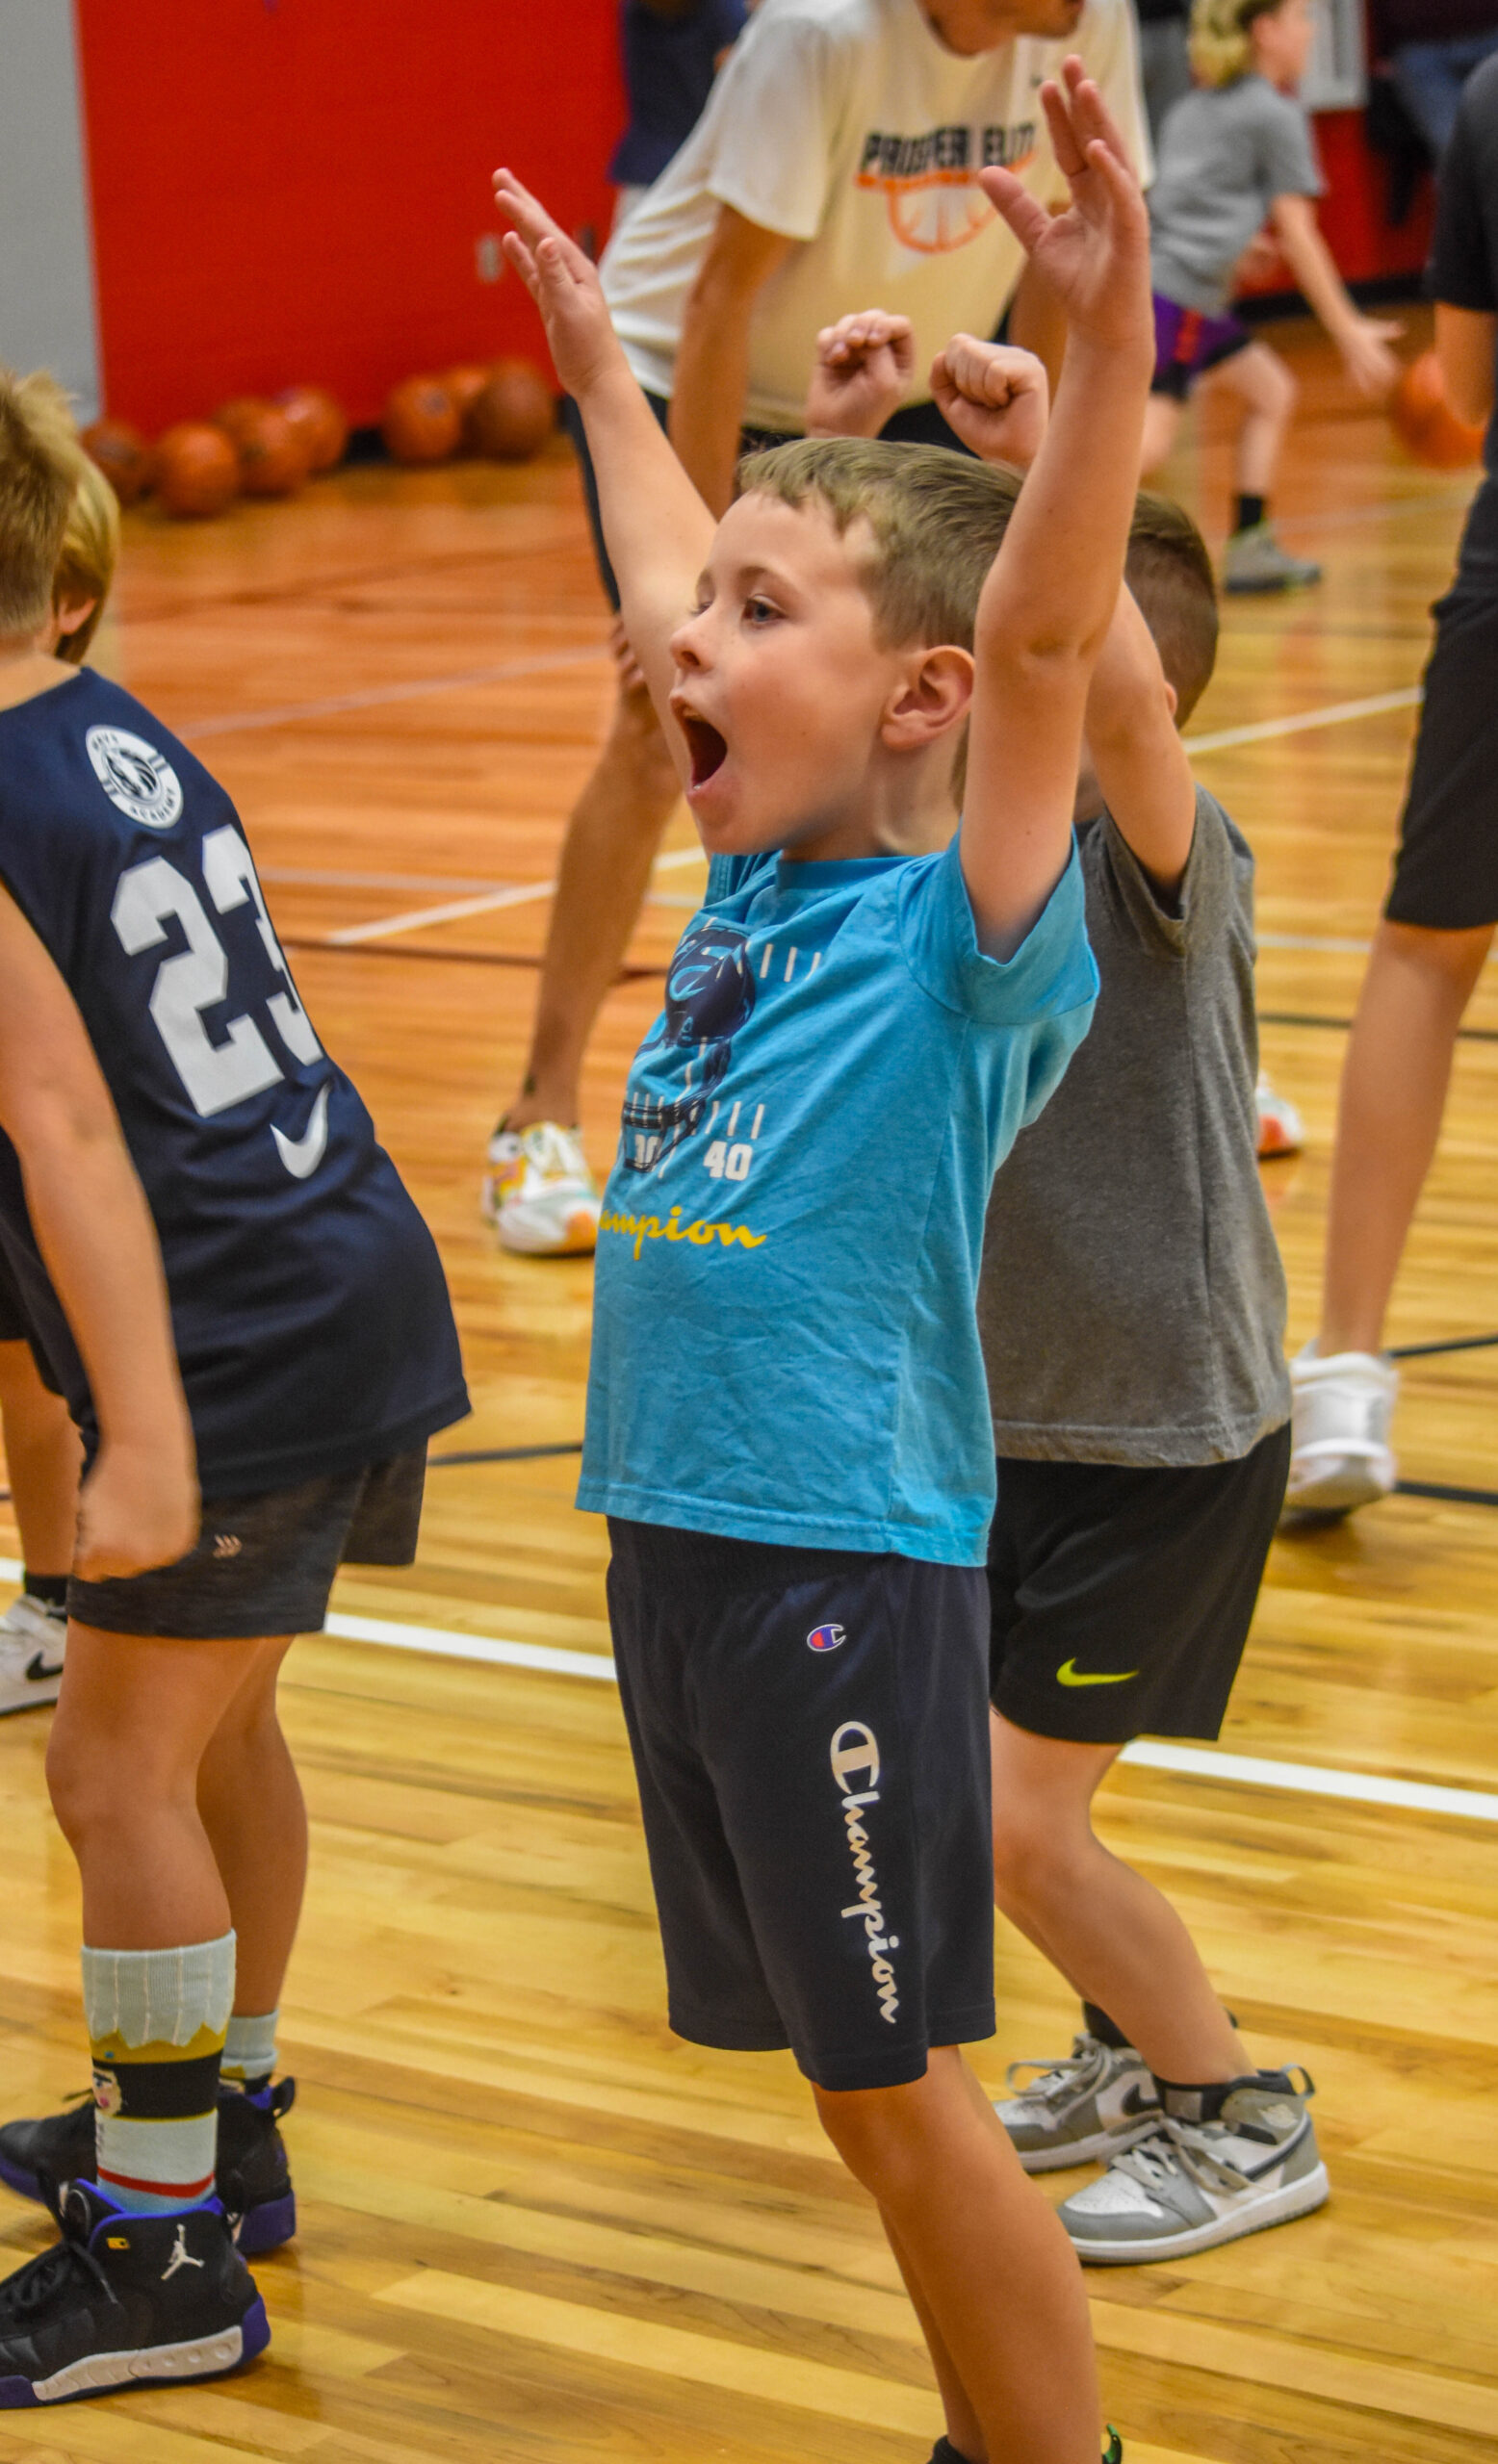 A young kindergarten Elite Hooper celebrating an accomplishment with a joyful expression, embodying the fun and excitement of youth basketball